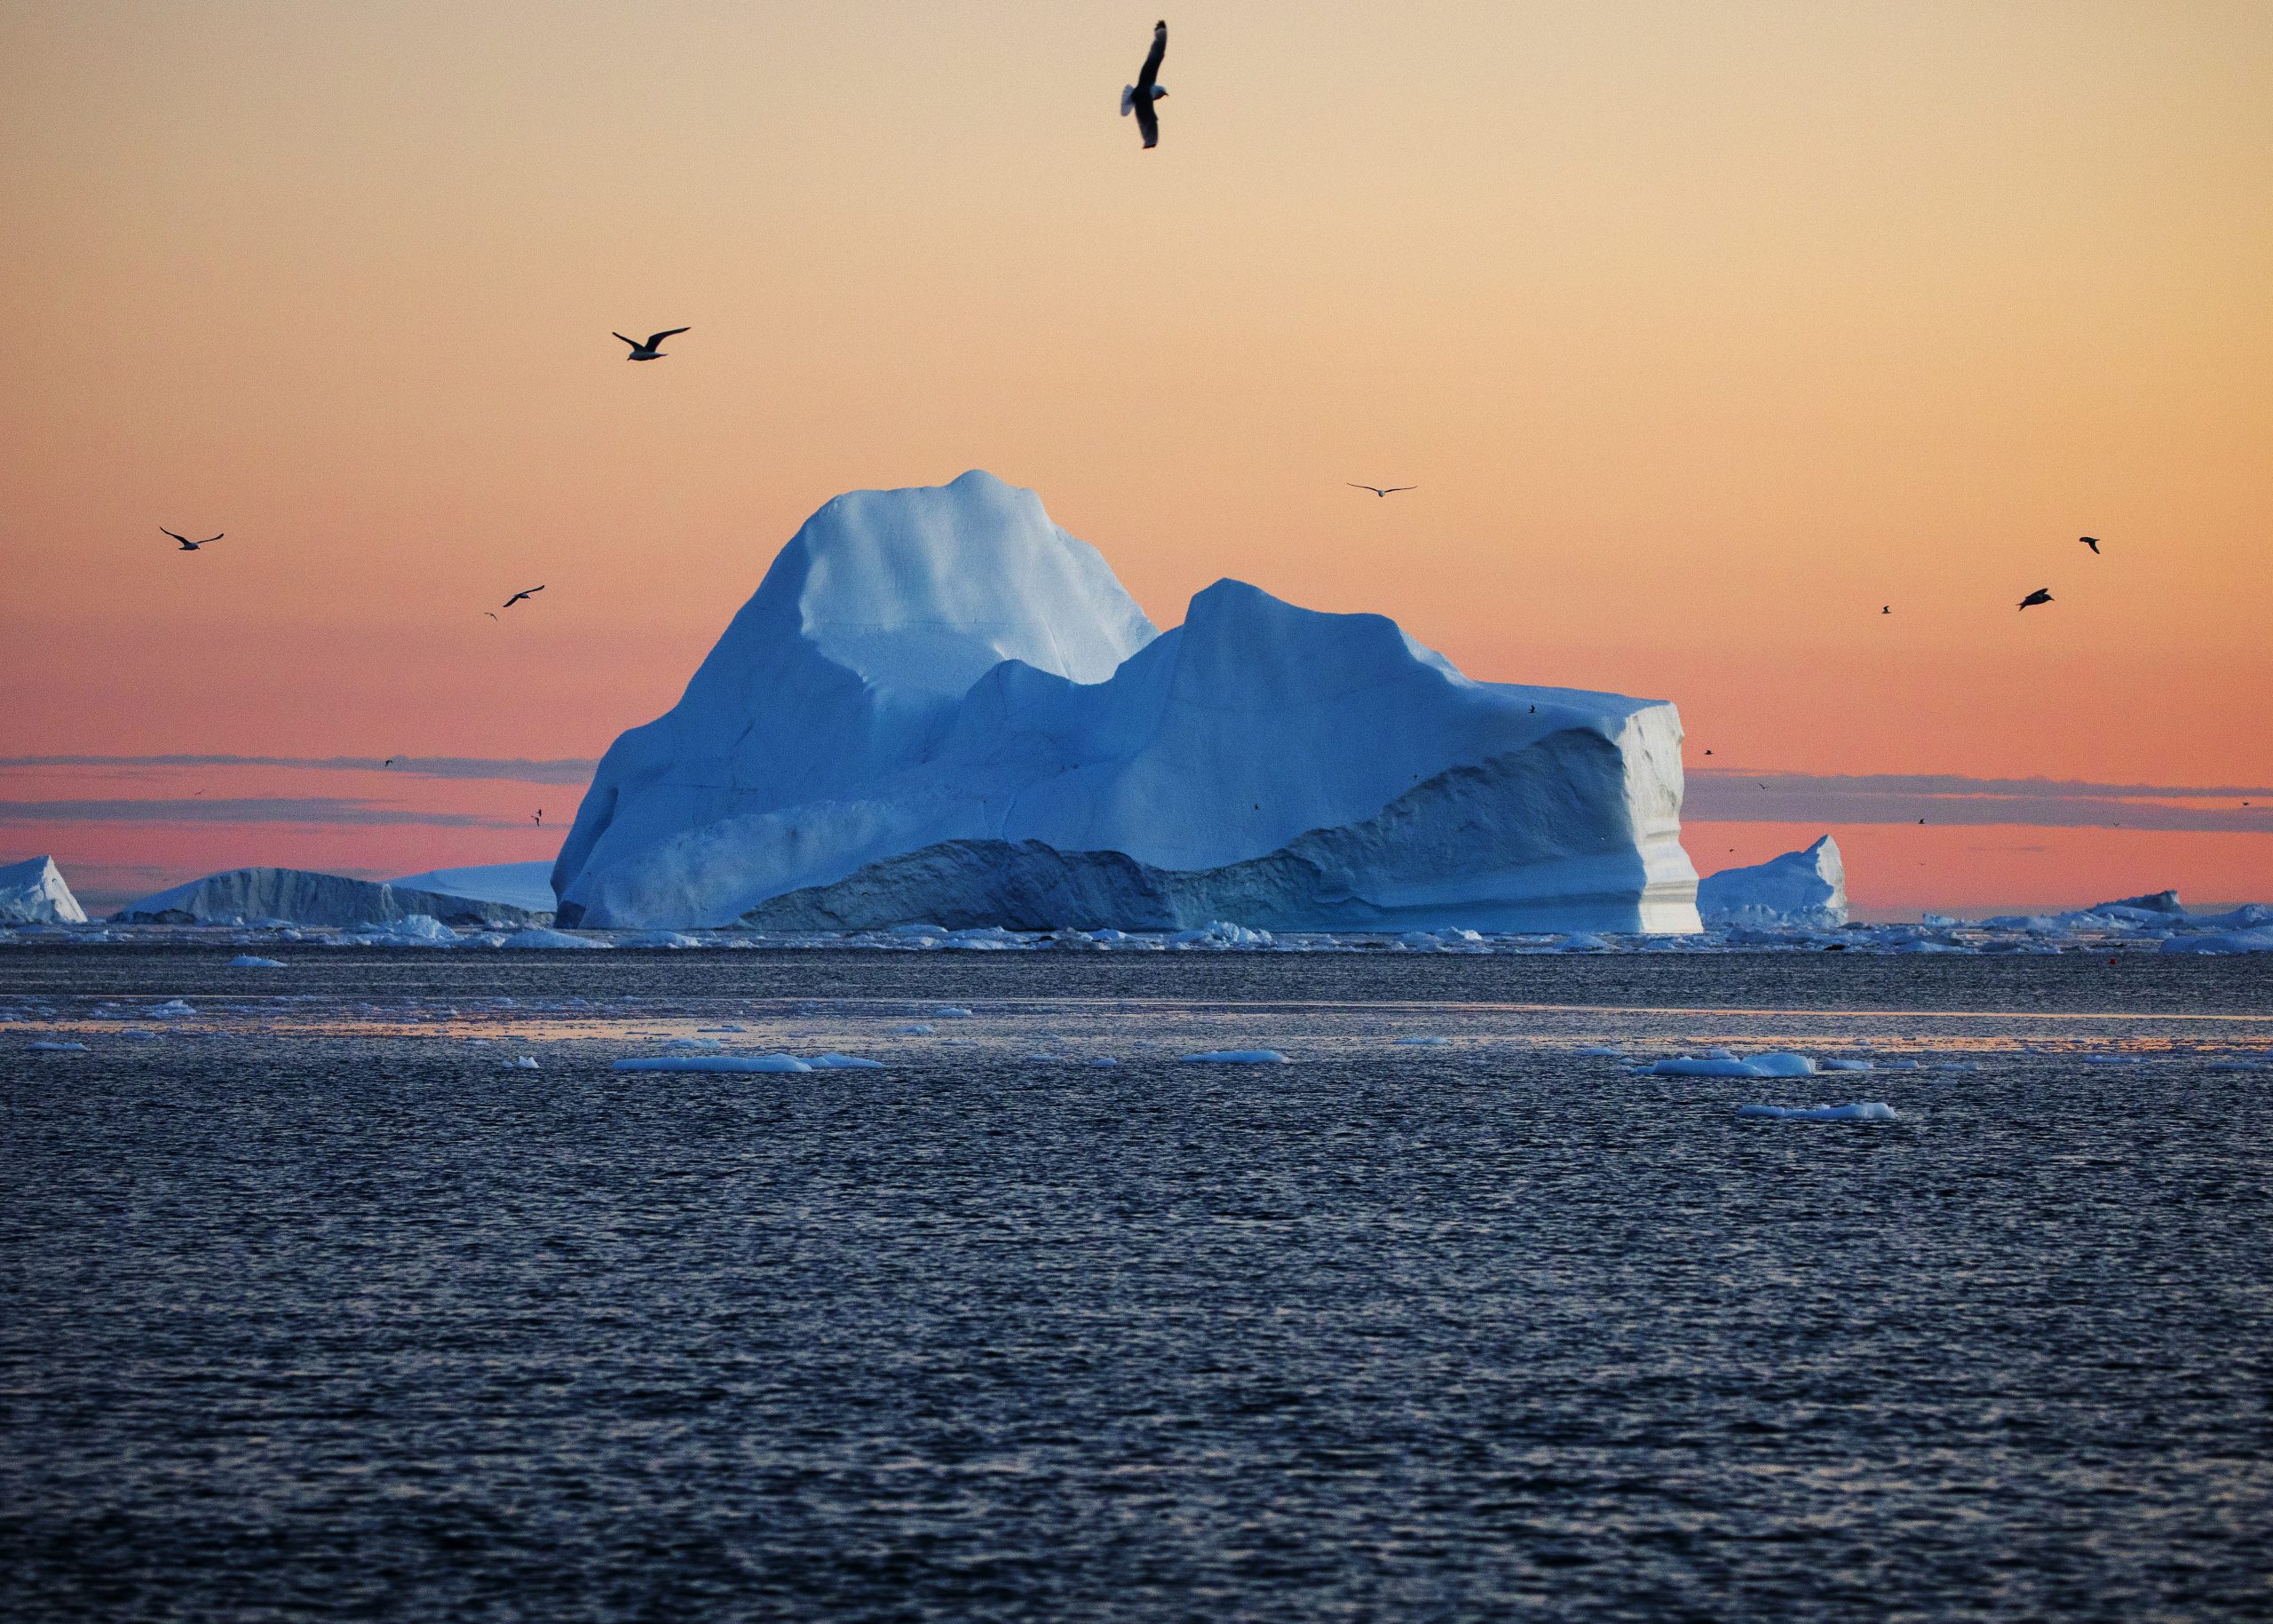 Seagulls fly around an iceberg in Disko Bay outside of Ilulissat on Wednesday, August 4, 2021. The giant ice sculptures are pieces of ice that have broken off of the Ilulissat Glacier, also known as Jakobshavn, 40 miles inland. Lauren Petracca/Staff